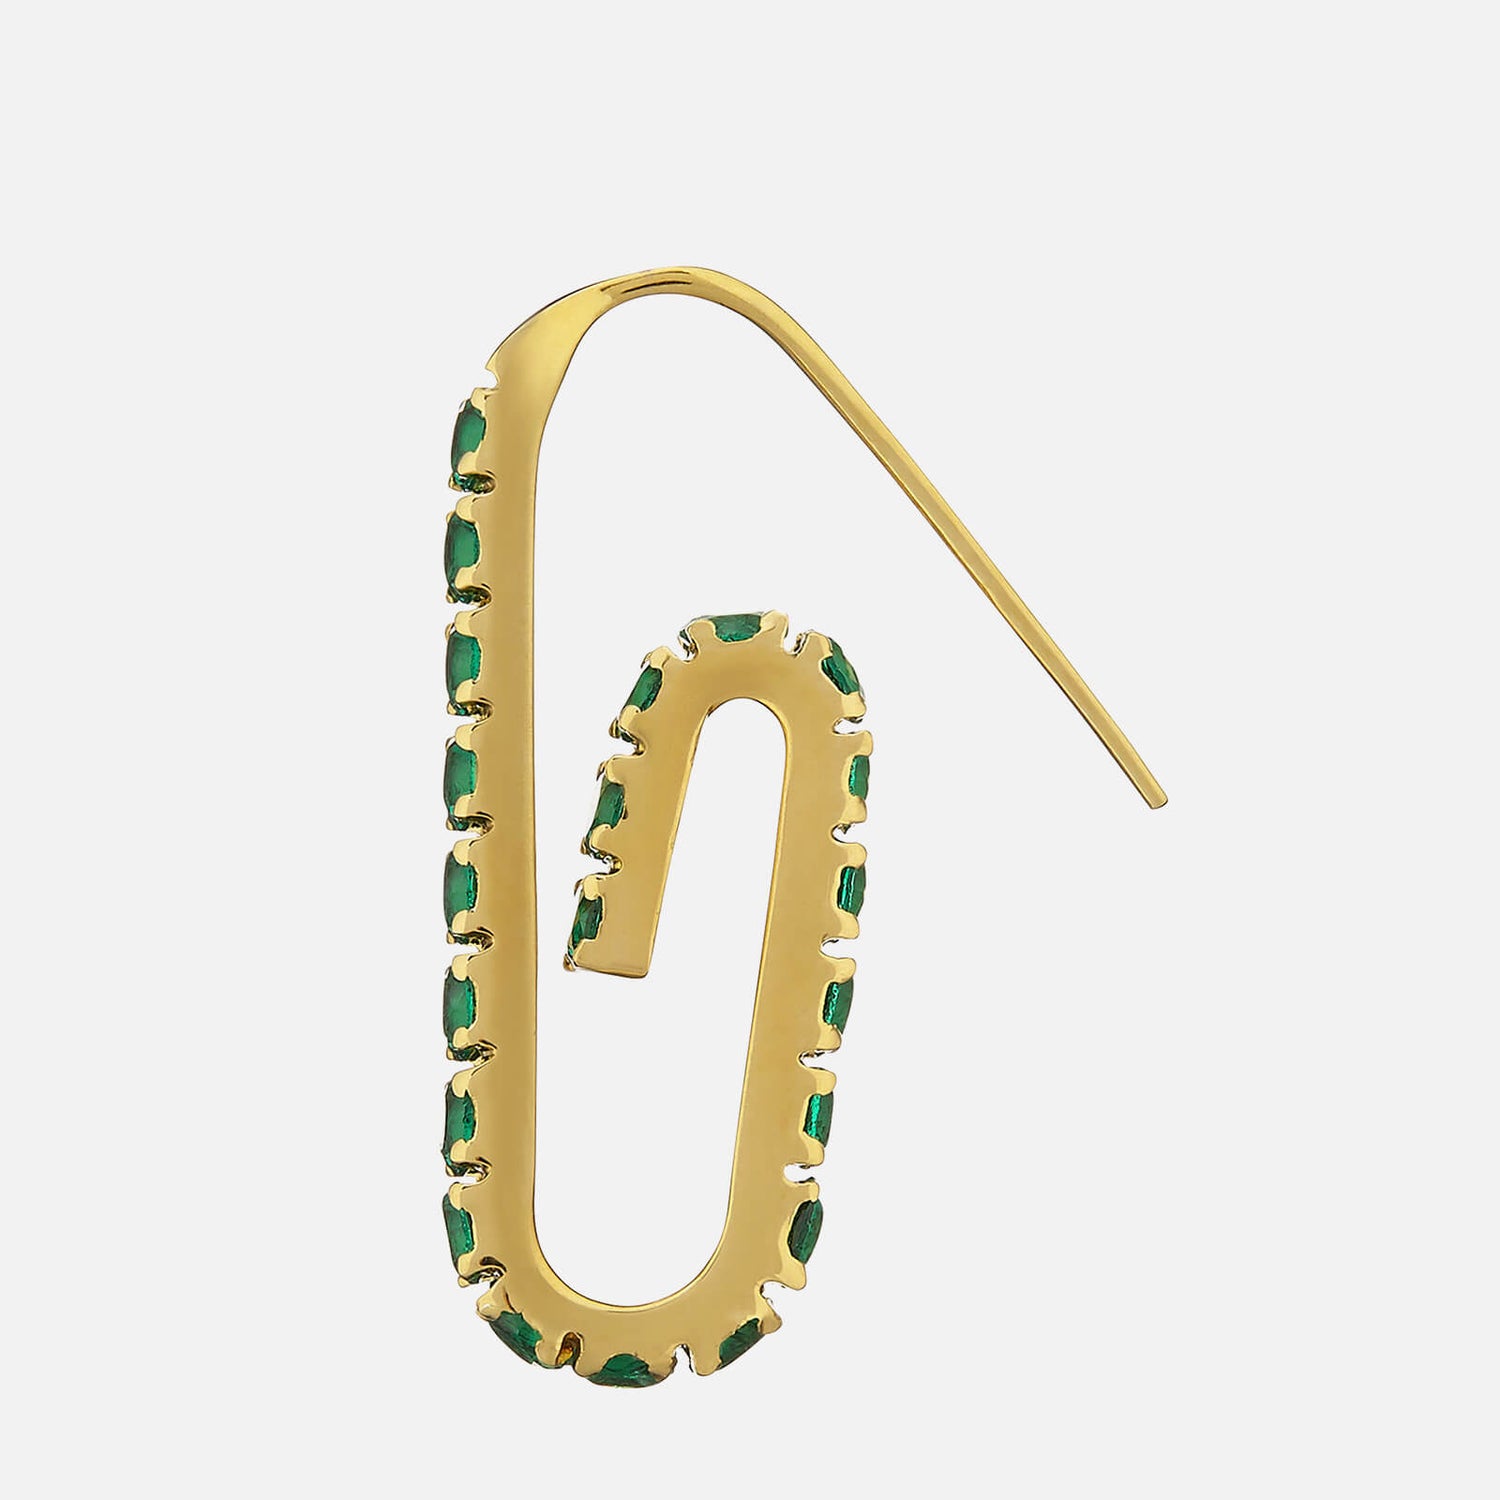 Hillier Bartley Women's Jumbo Pave Paperclip Earring - Gold/Green